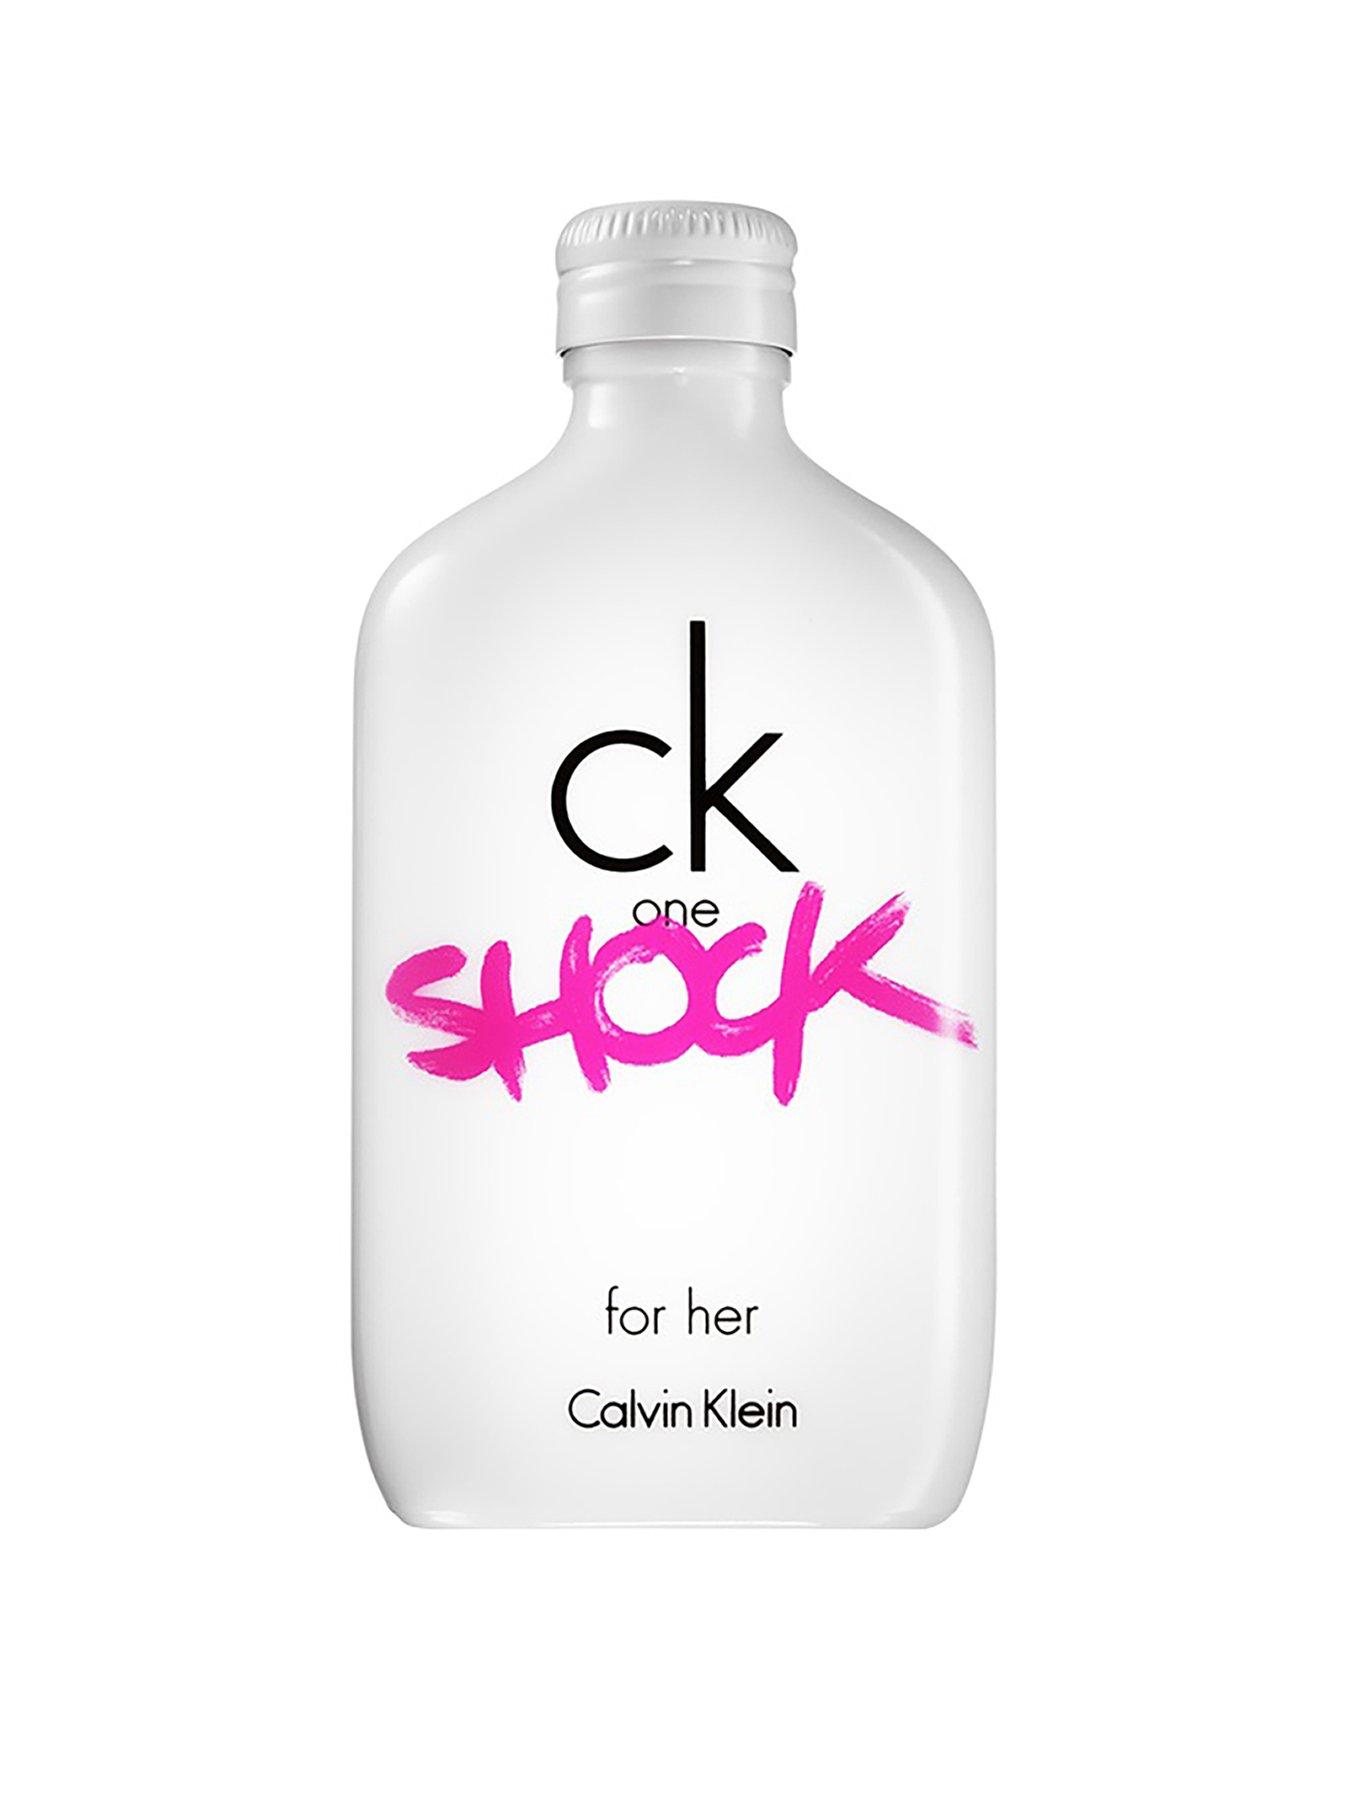 ck one the perfume shop